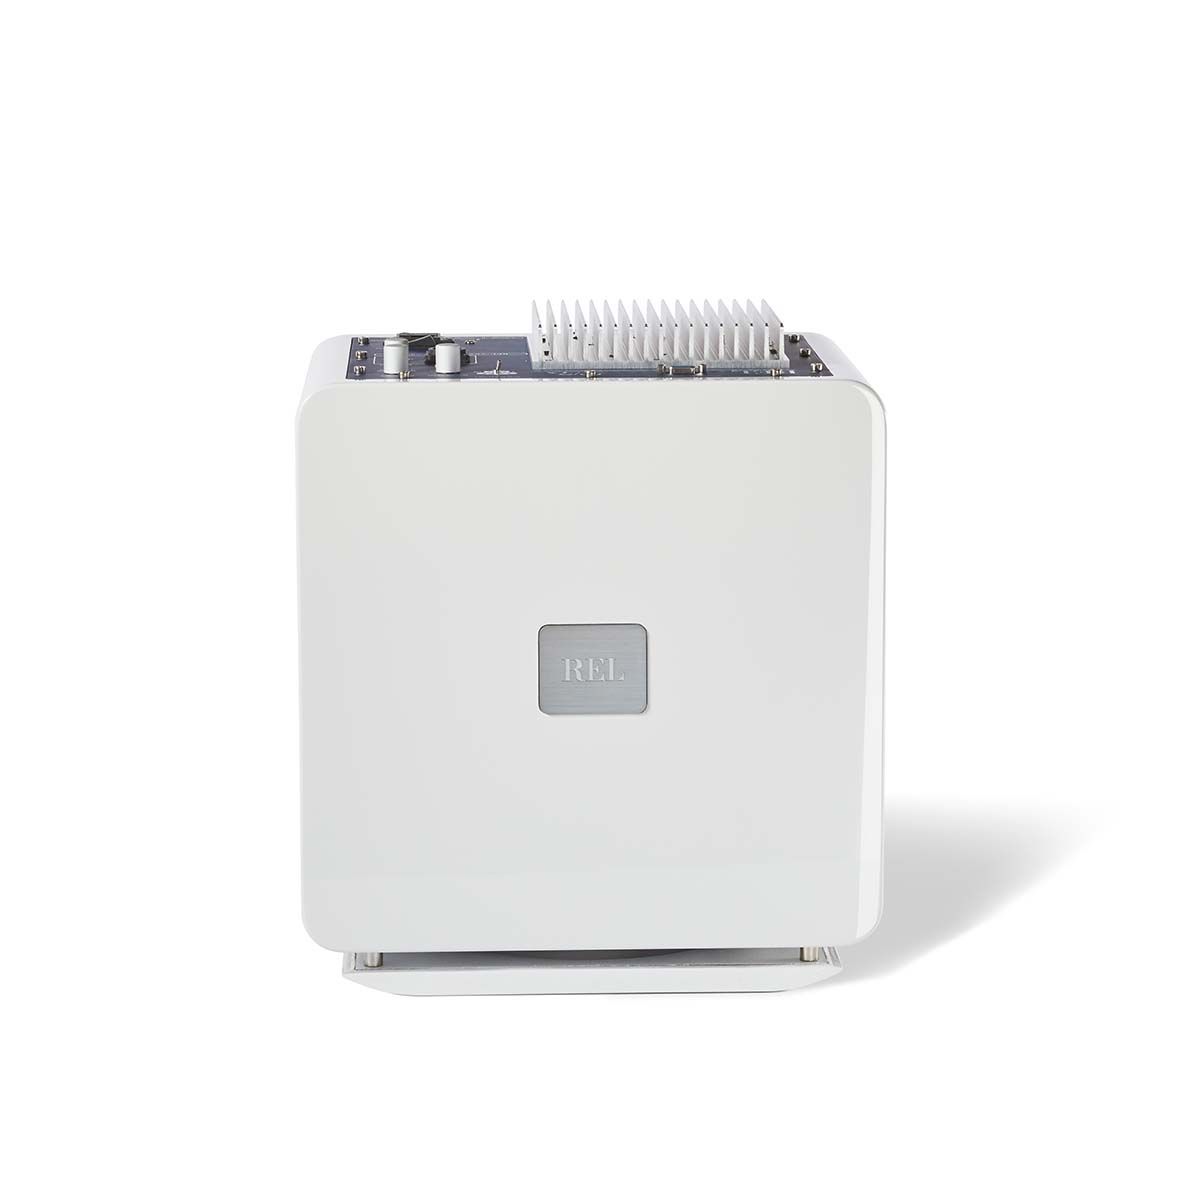 REL T/7x Subwoofer, white, top view